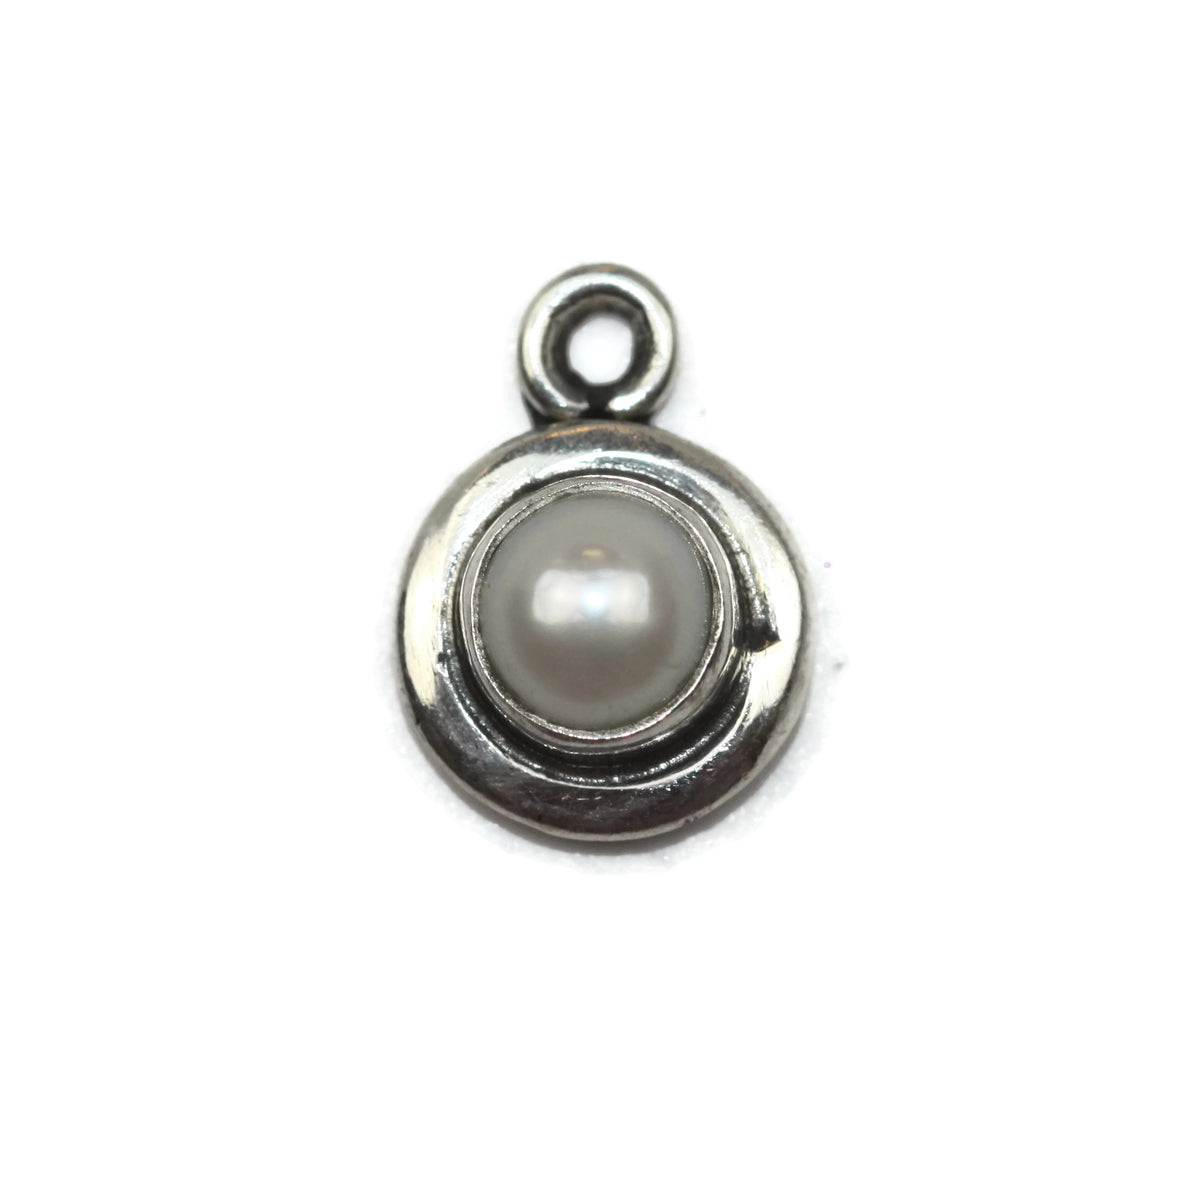 Handmade 925 Sterling Silver Tiny Pearl Charm